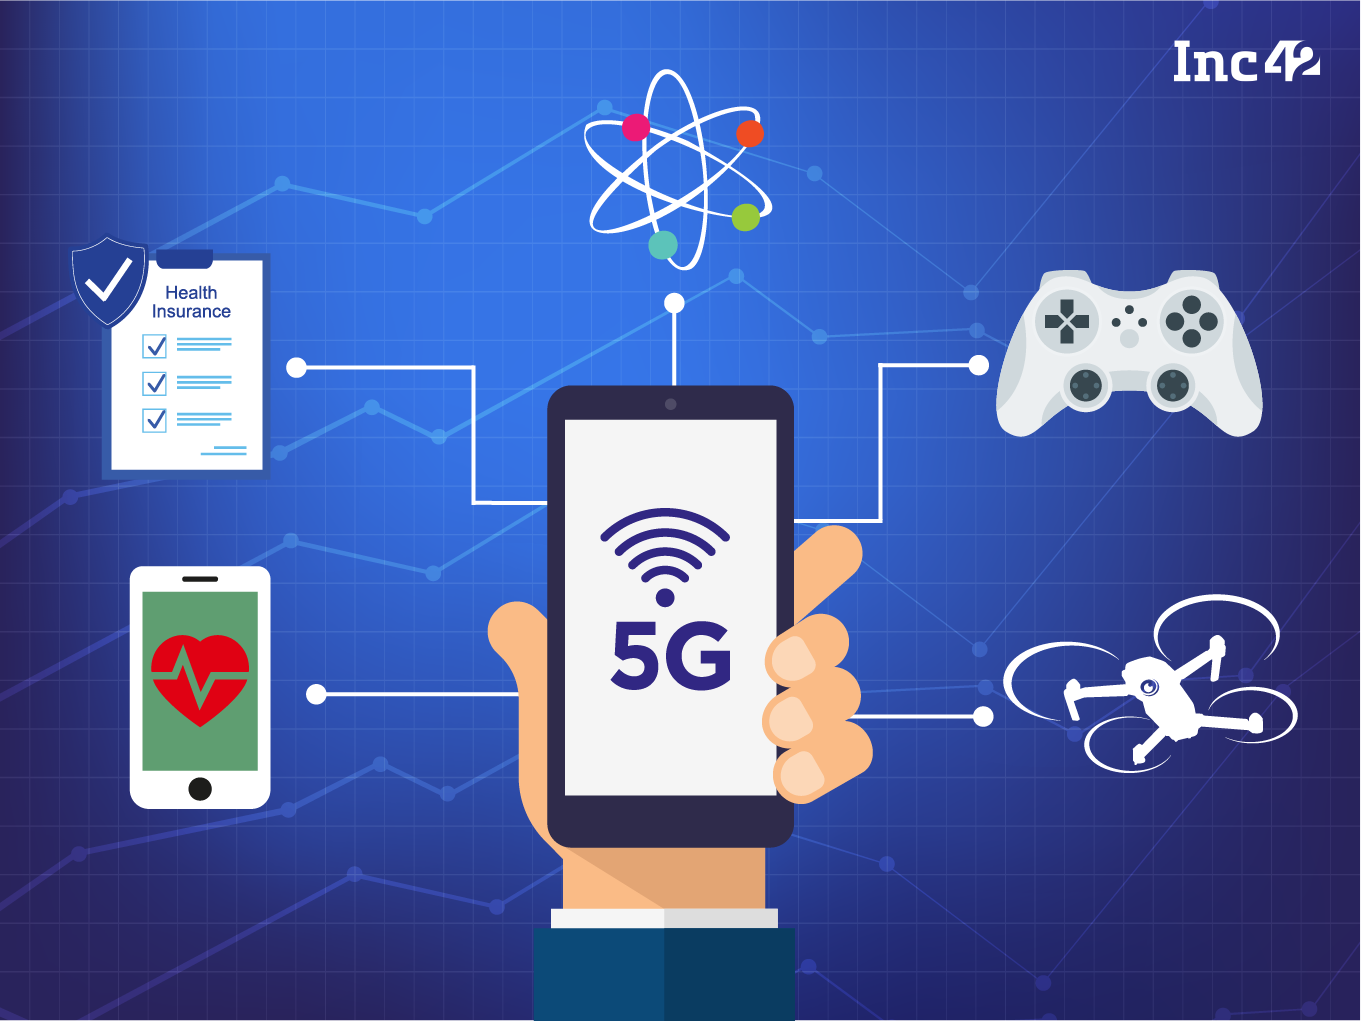 From Metaverse To Drones: Here’s How 5G Technology Will Change The Game For Indian Startups